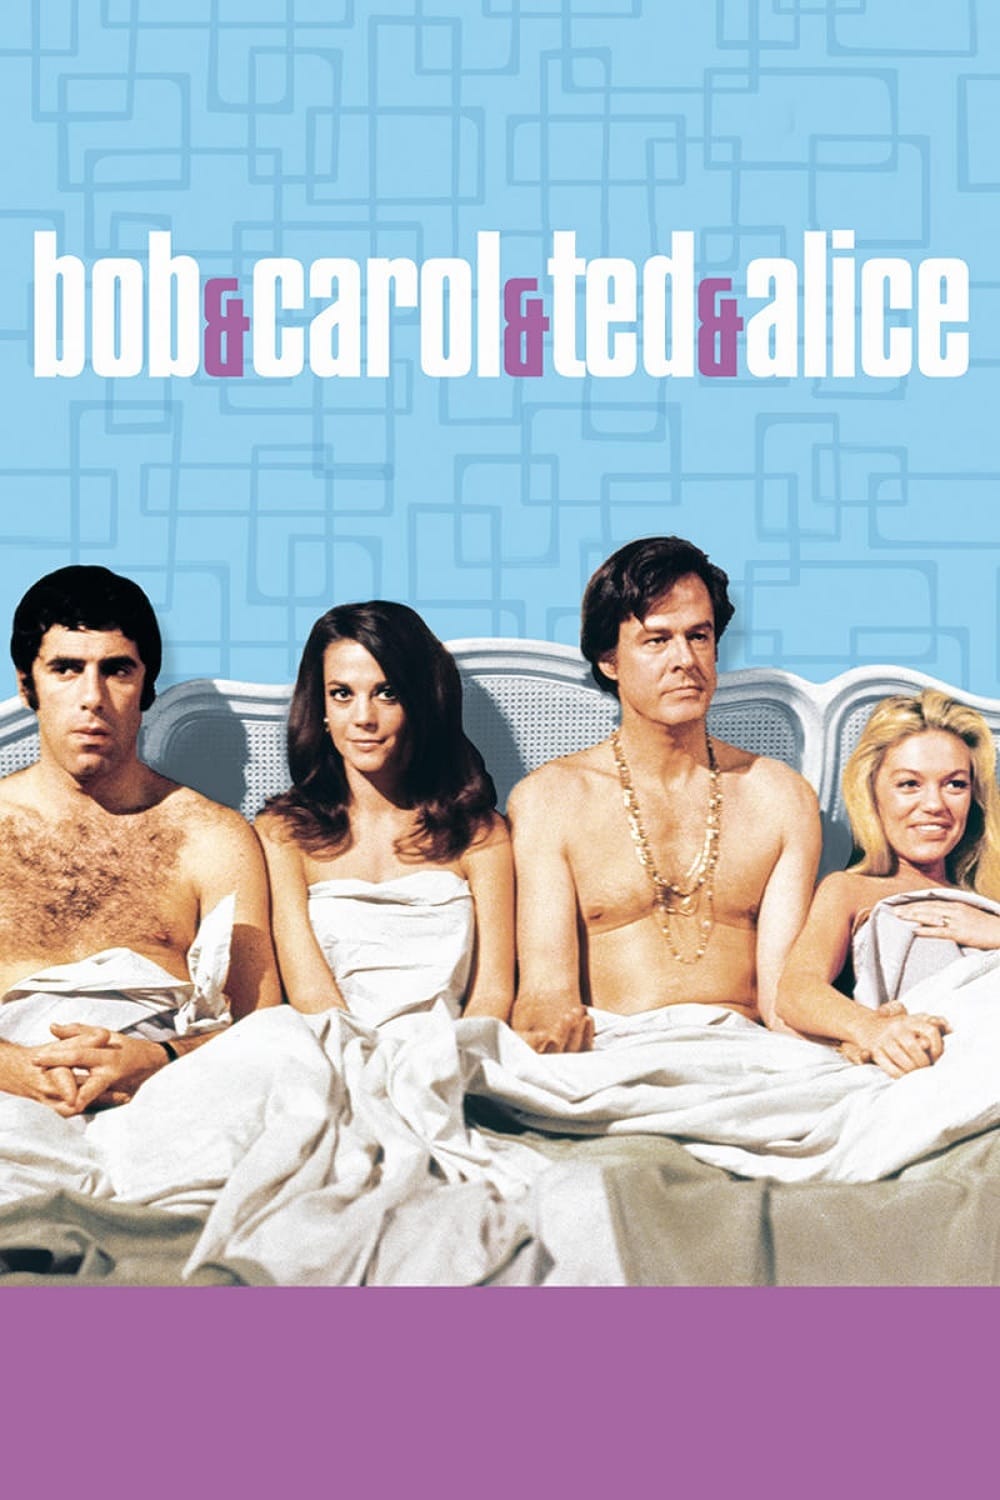 Poster for the movie "Bob & Carol & Ted & Alice"